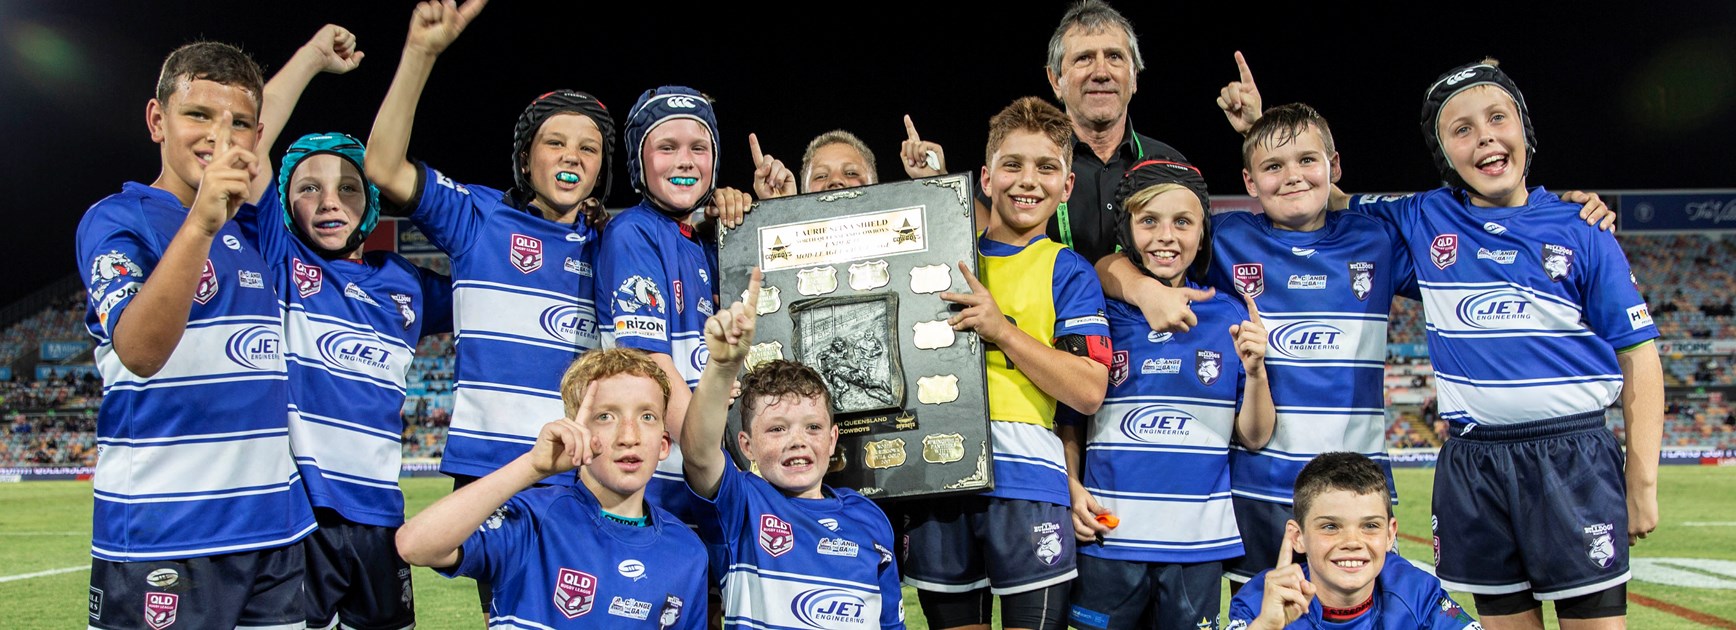 Mackay Brothers are Laurie Spina Shield champions